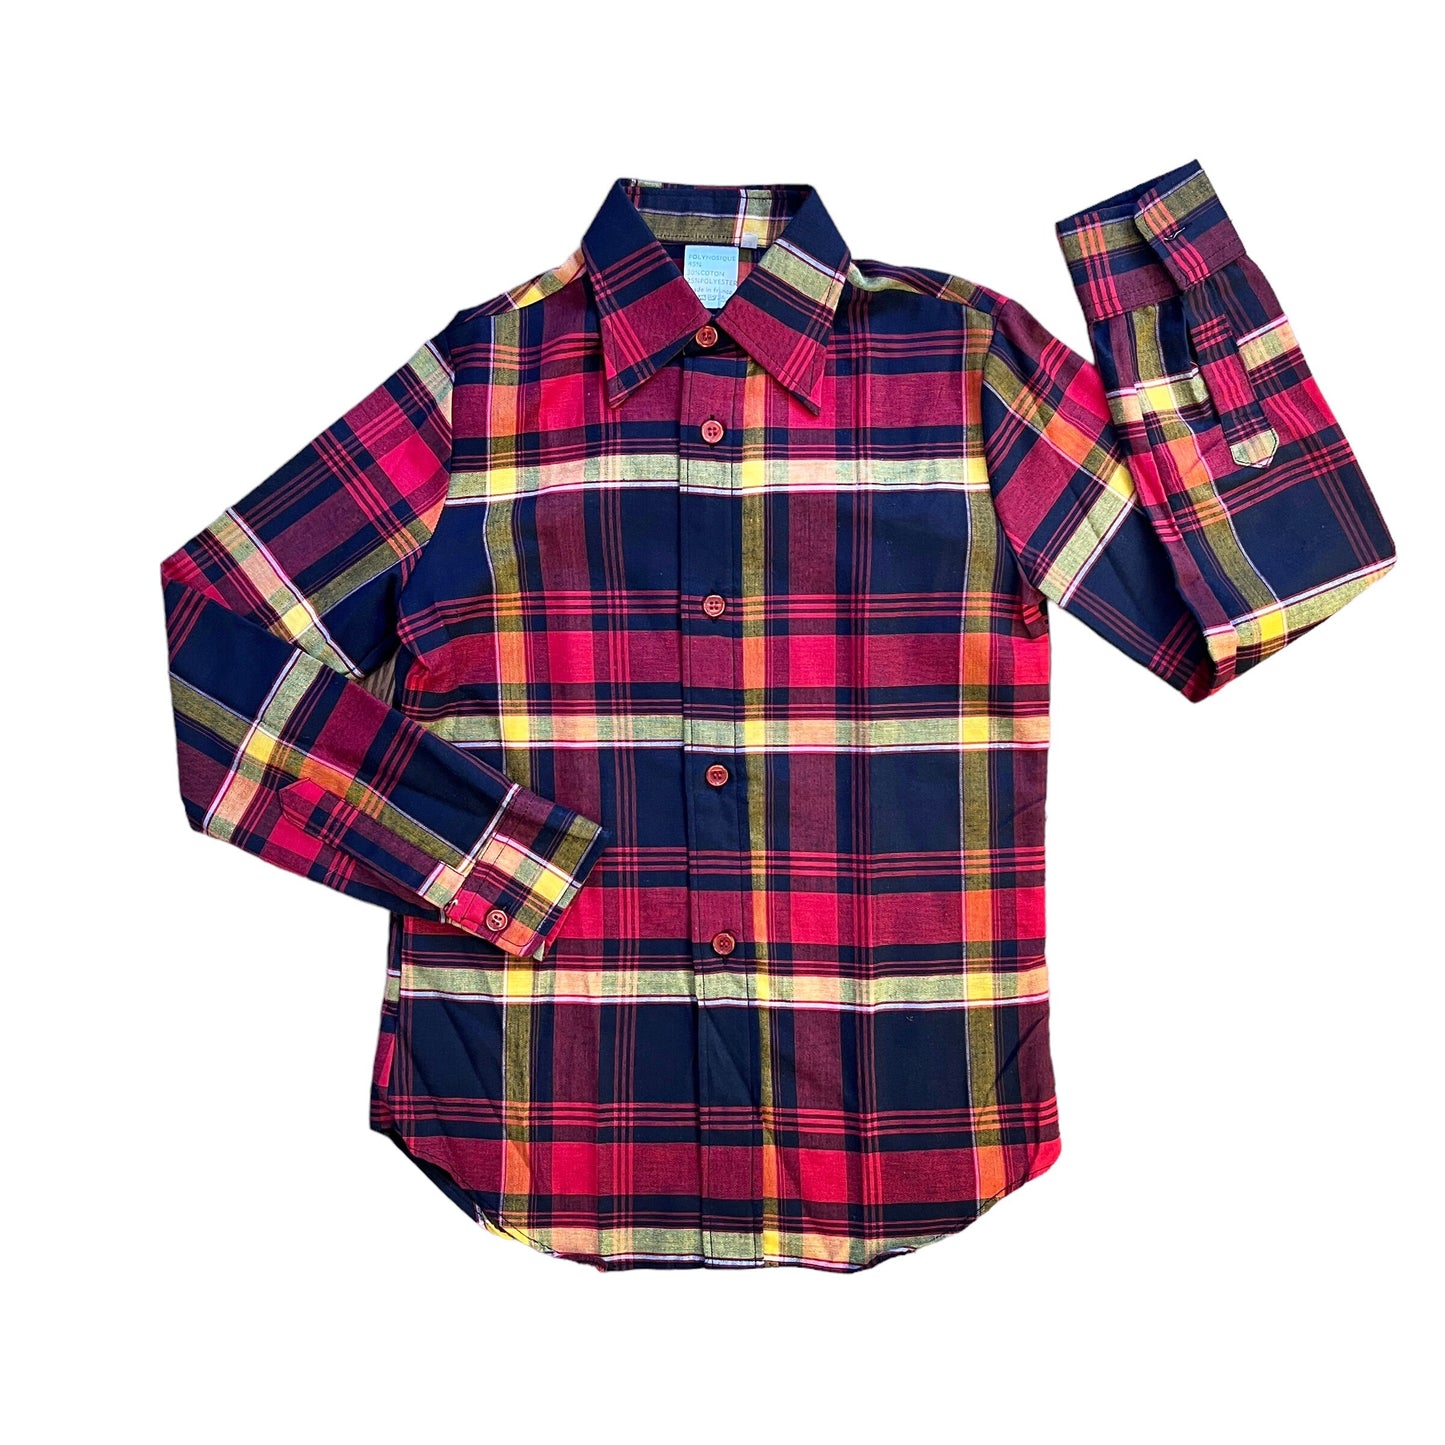 Vintage 1970s Black / Red Check Shirt 10-12 Years